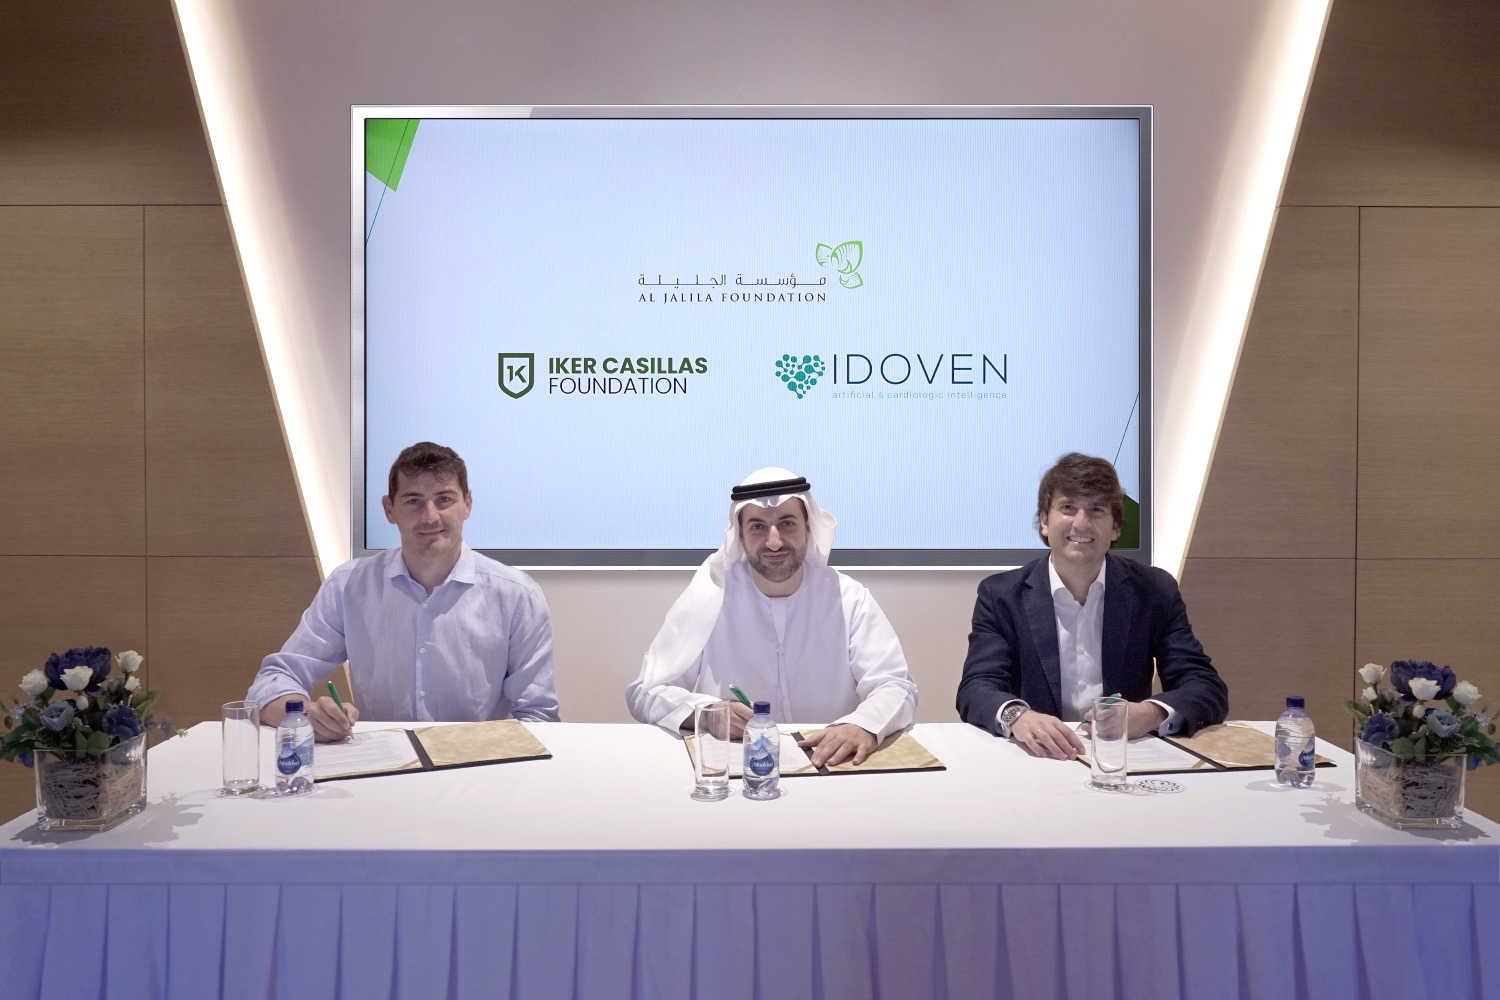 Al Jalila Foundation partners with Fundación Iker Casillas and IDOVEN to advance cardiovascular research and promote healthy living